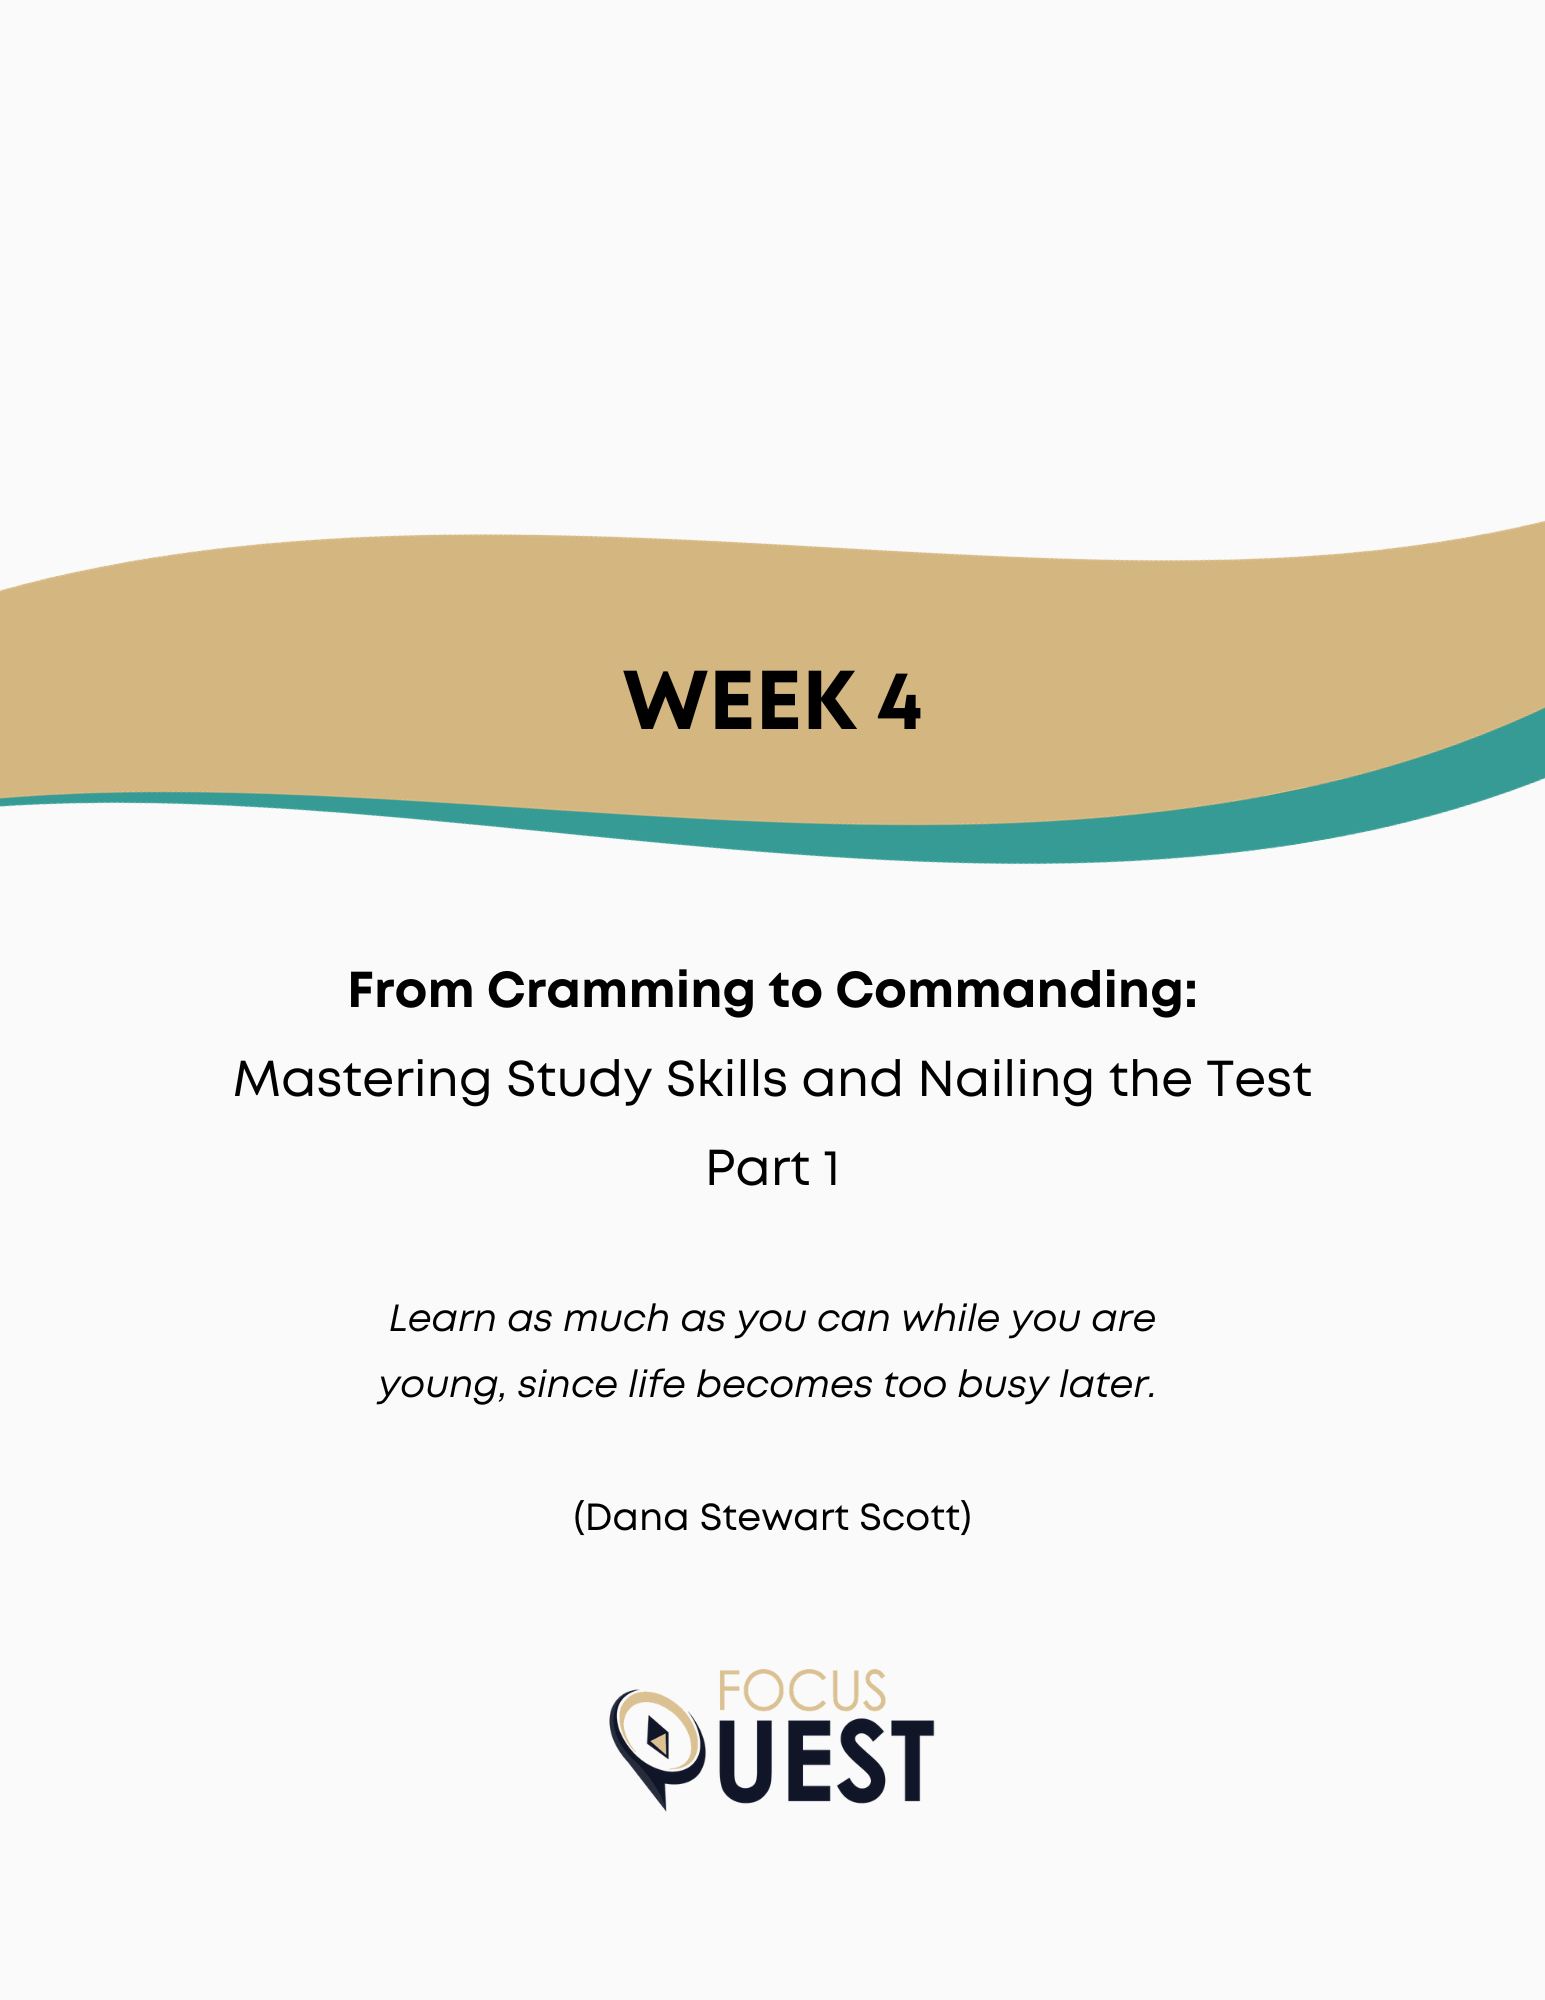 FocusQuest - Quest for Success - Week 4 - From Cramming to Commanding: Mastering Study Skills and Nailing the Test Part 1